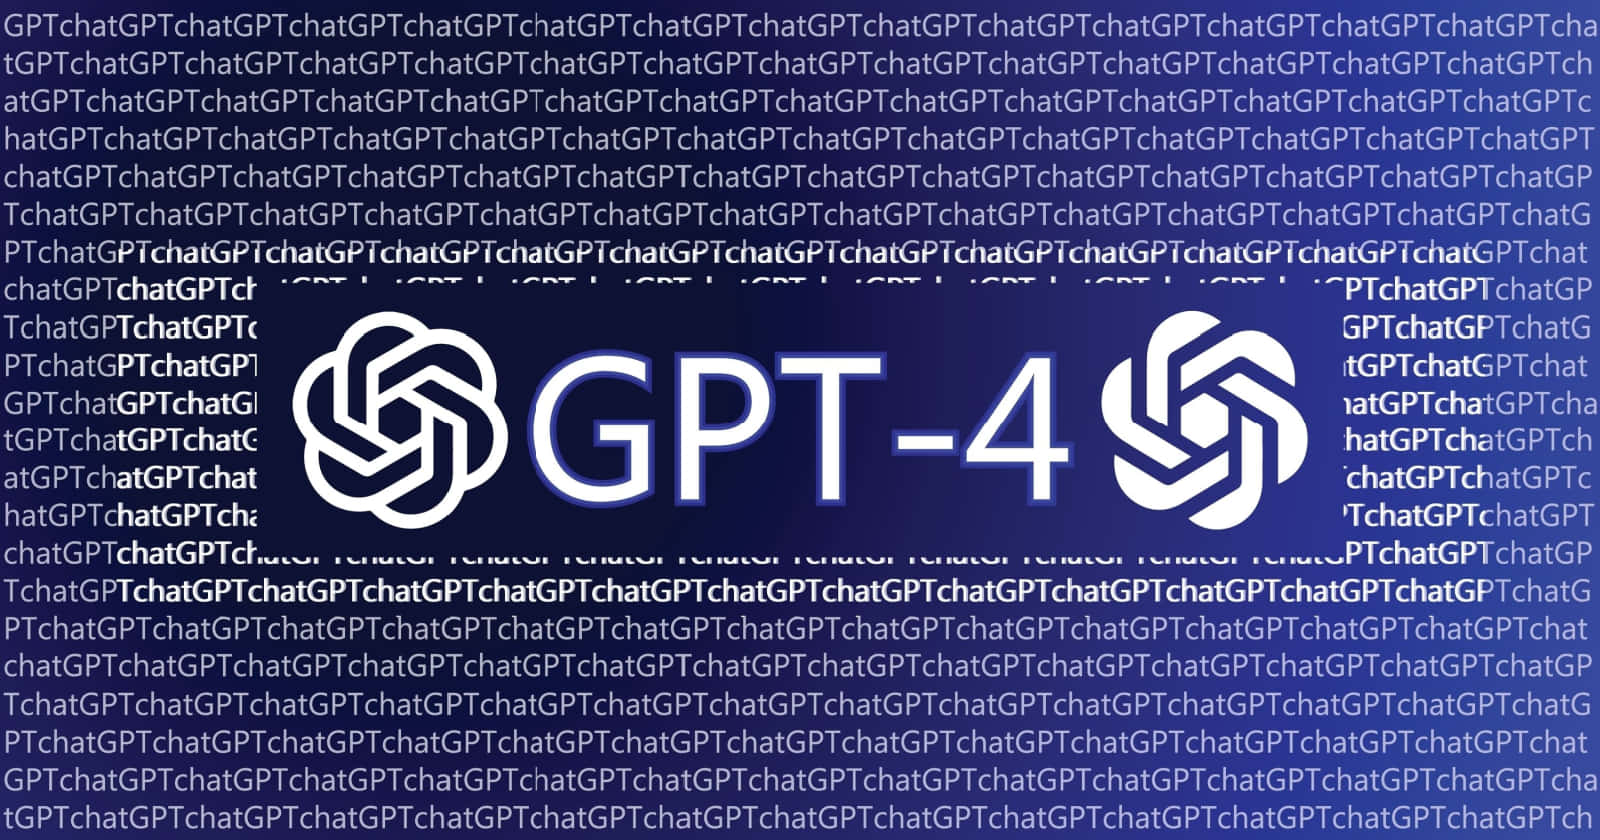 An illustration of the advanced GPT-4 AI language processing model Wallpaper